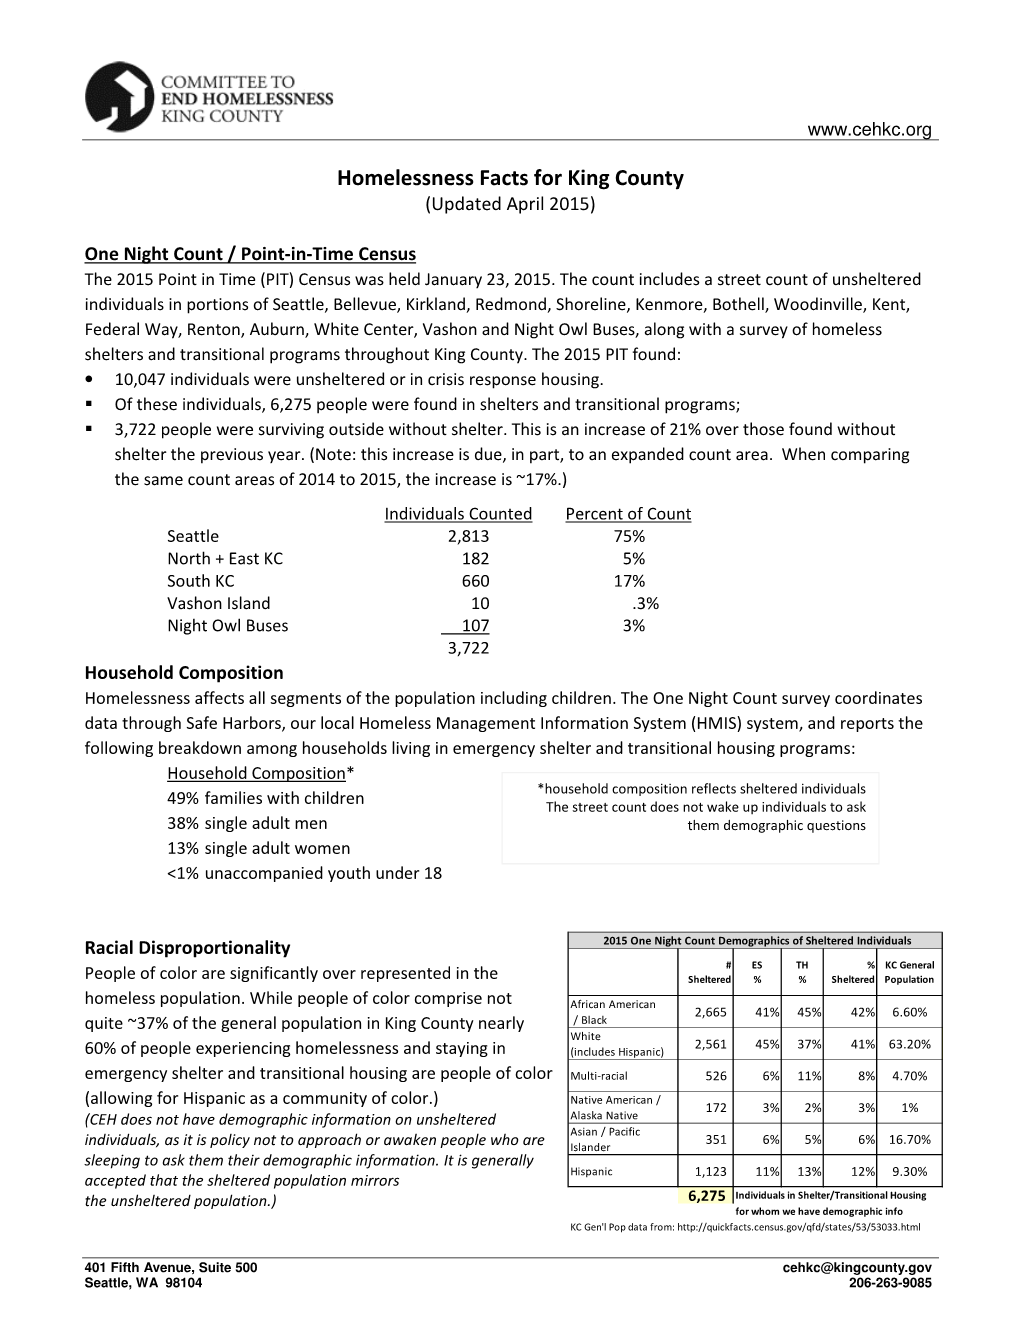 Homelessness Facts for King County (Updated April 2015)